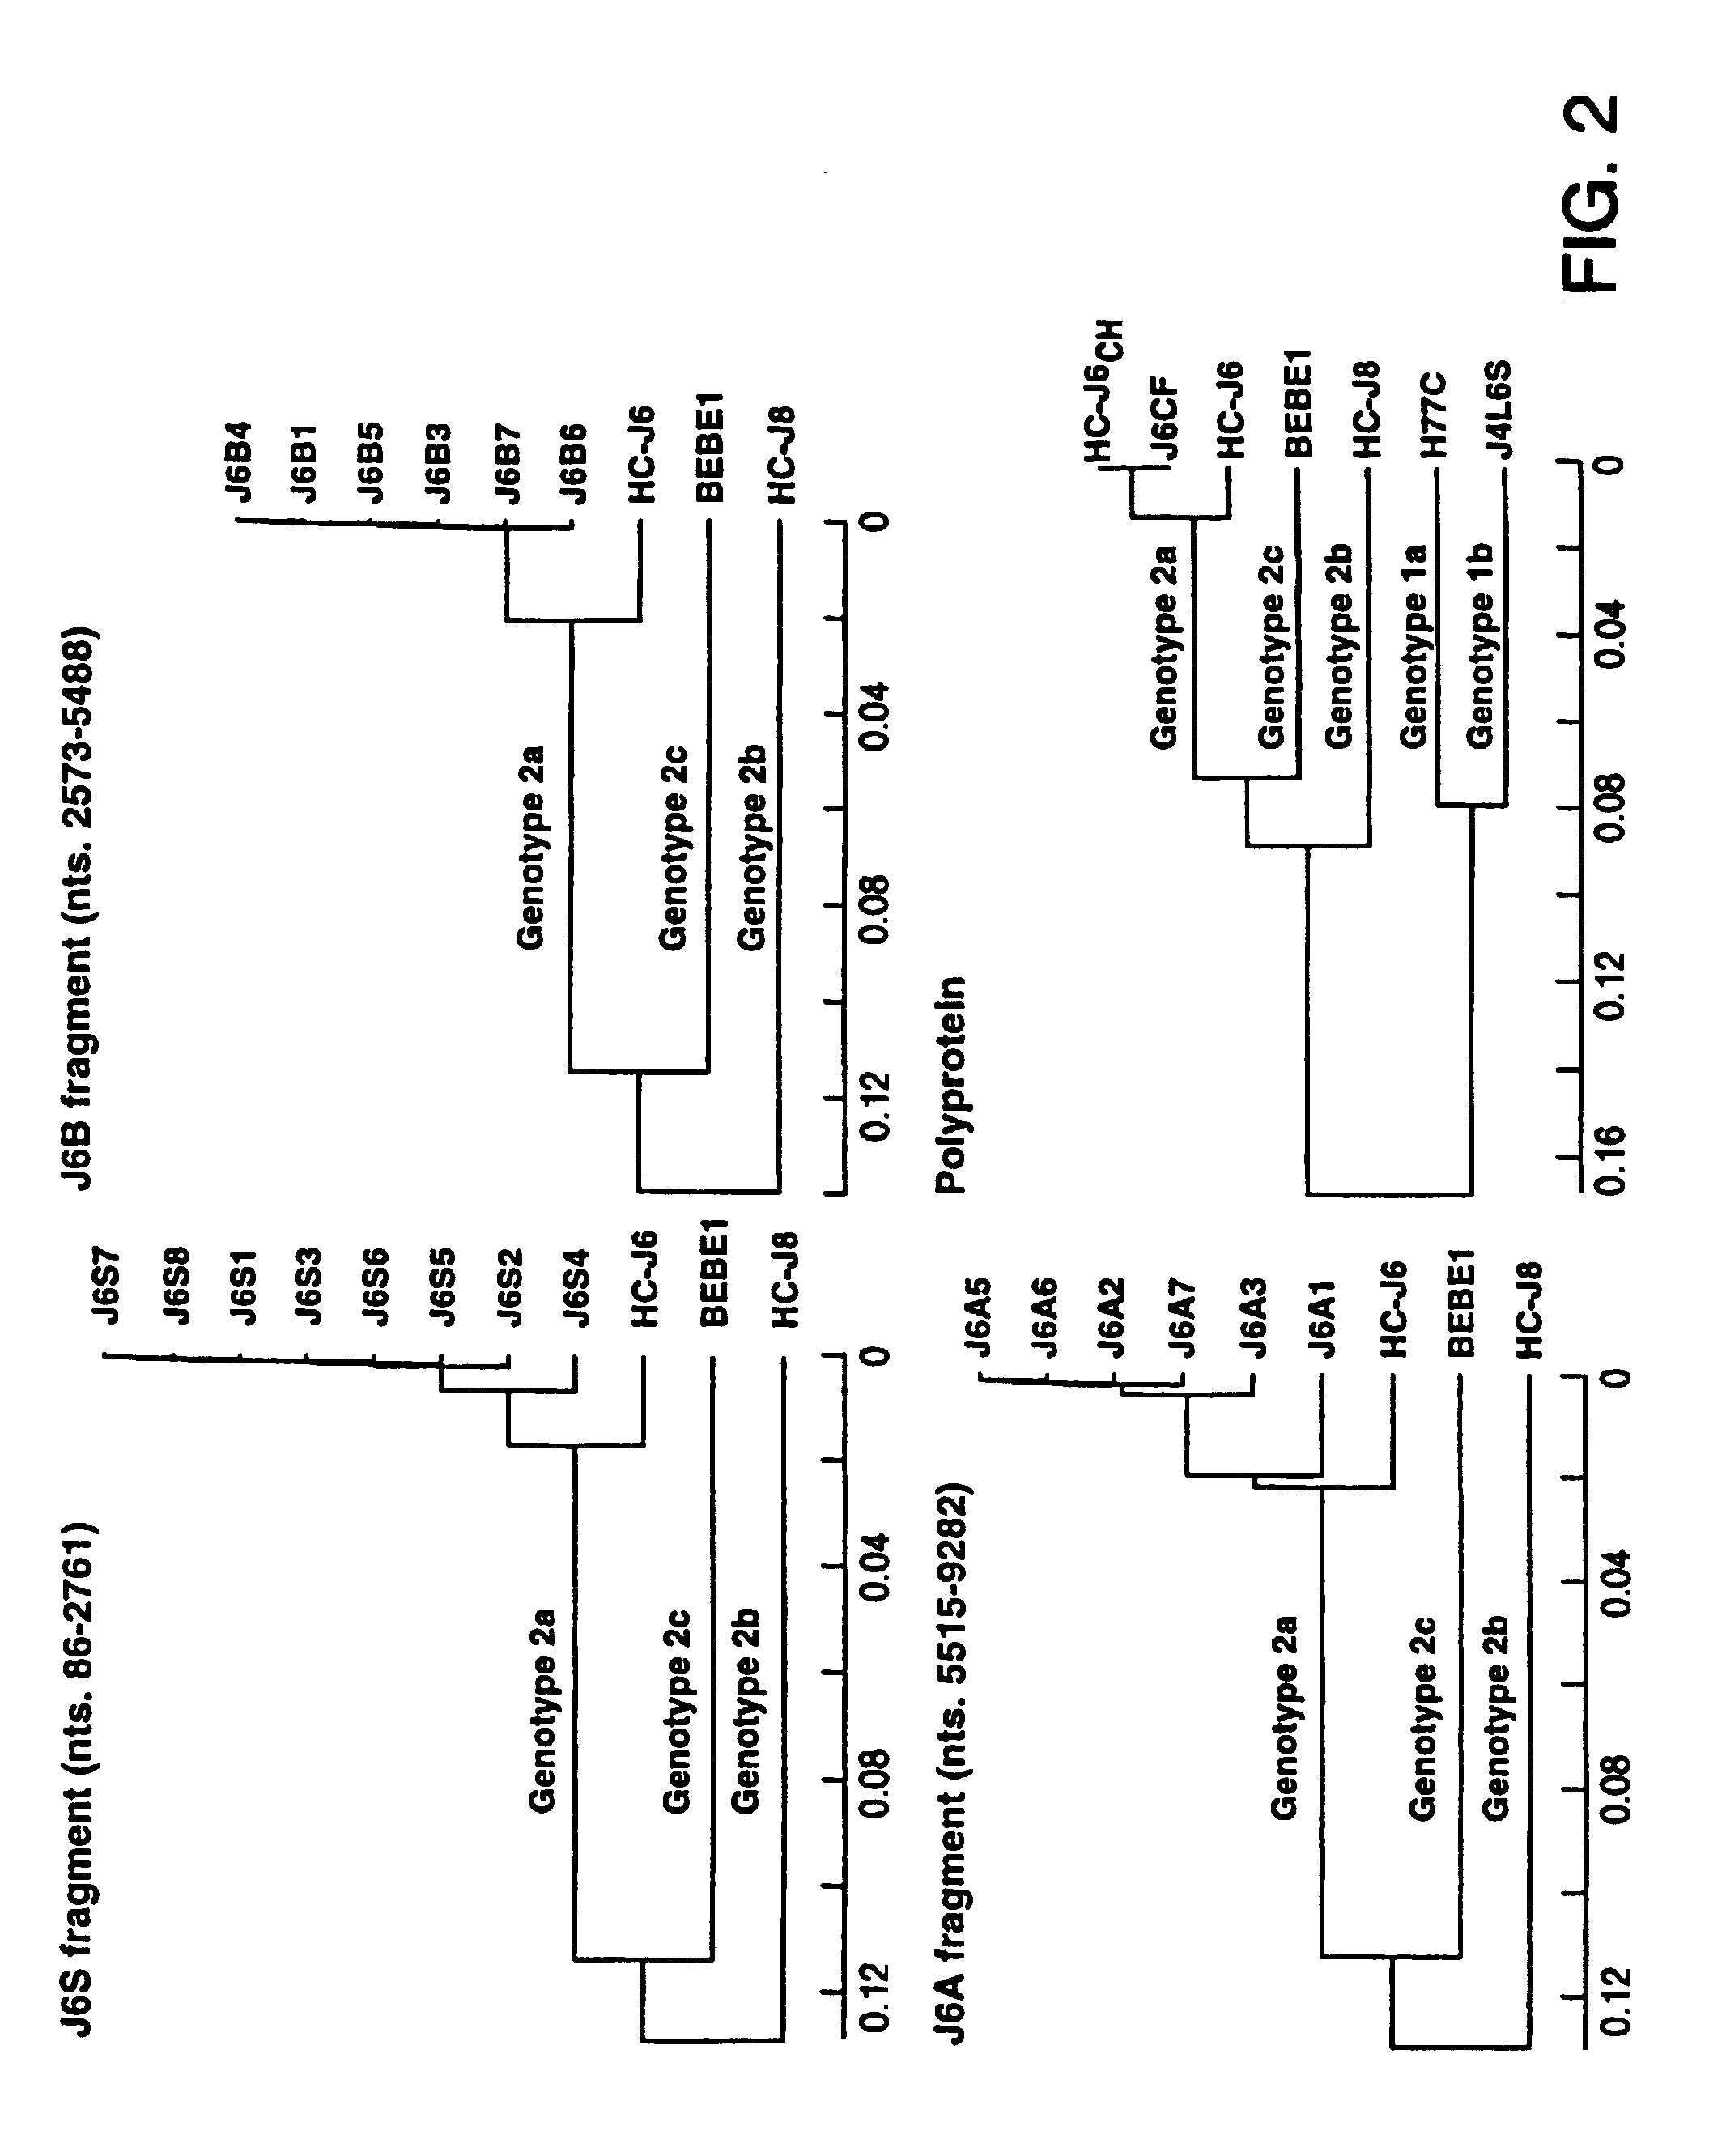 Cloned genome of infectious hepatitus C virus of genotype 2A and uses thereof